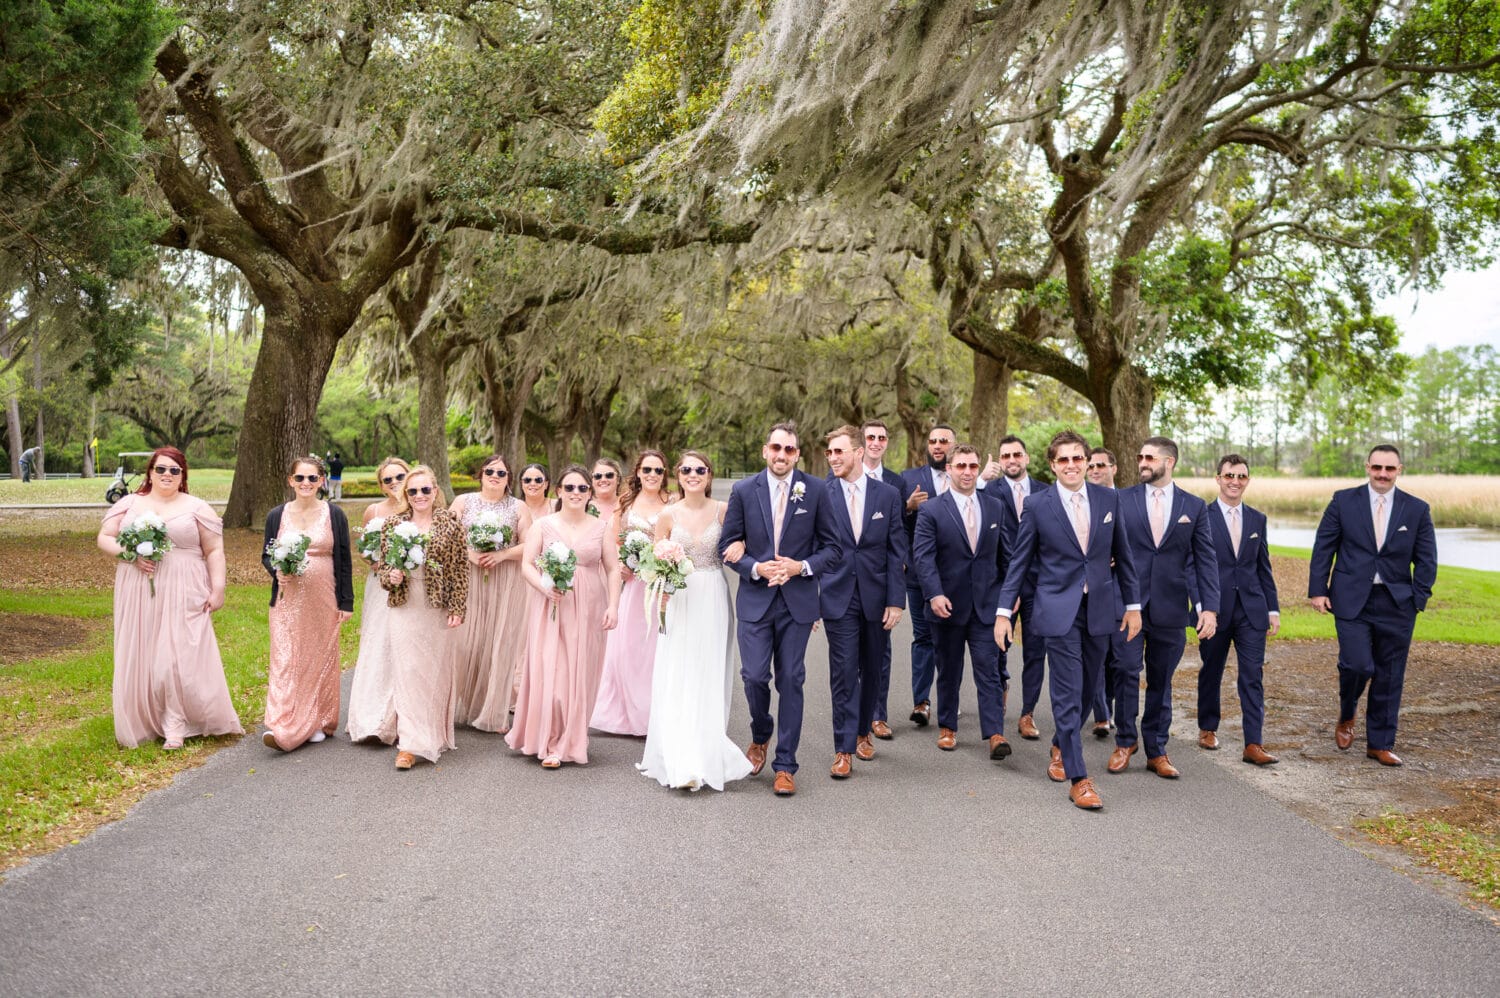 Bridal party walking together with sunglasses  - Caledonia Golf & Fish Club